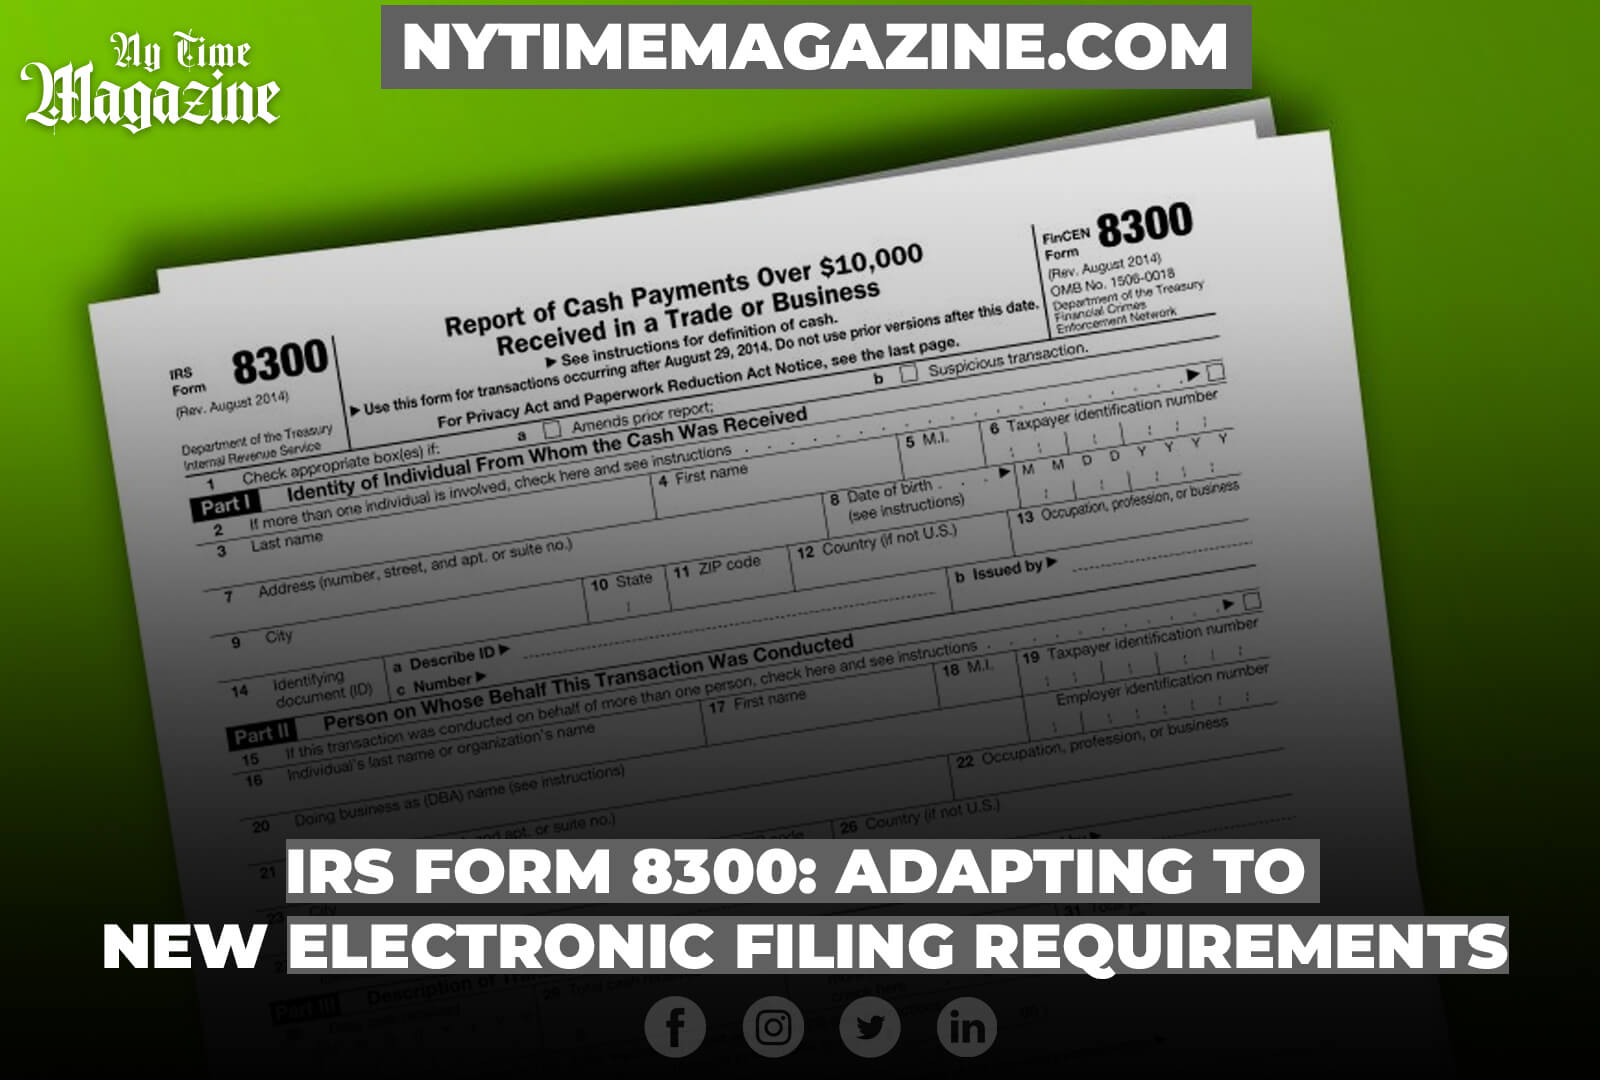 IRS Form 8300: Adapting to New Electronic Filing Requirements